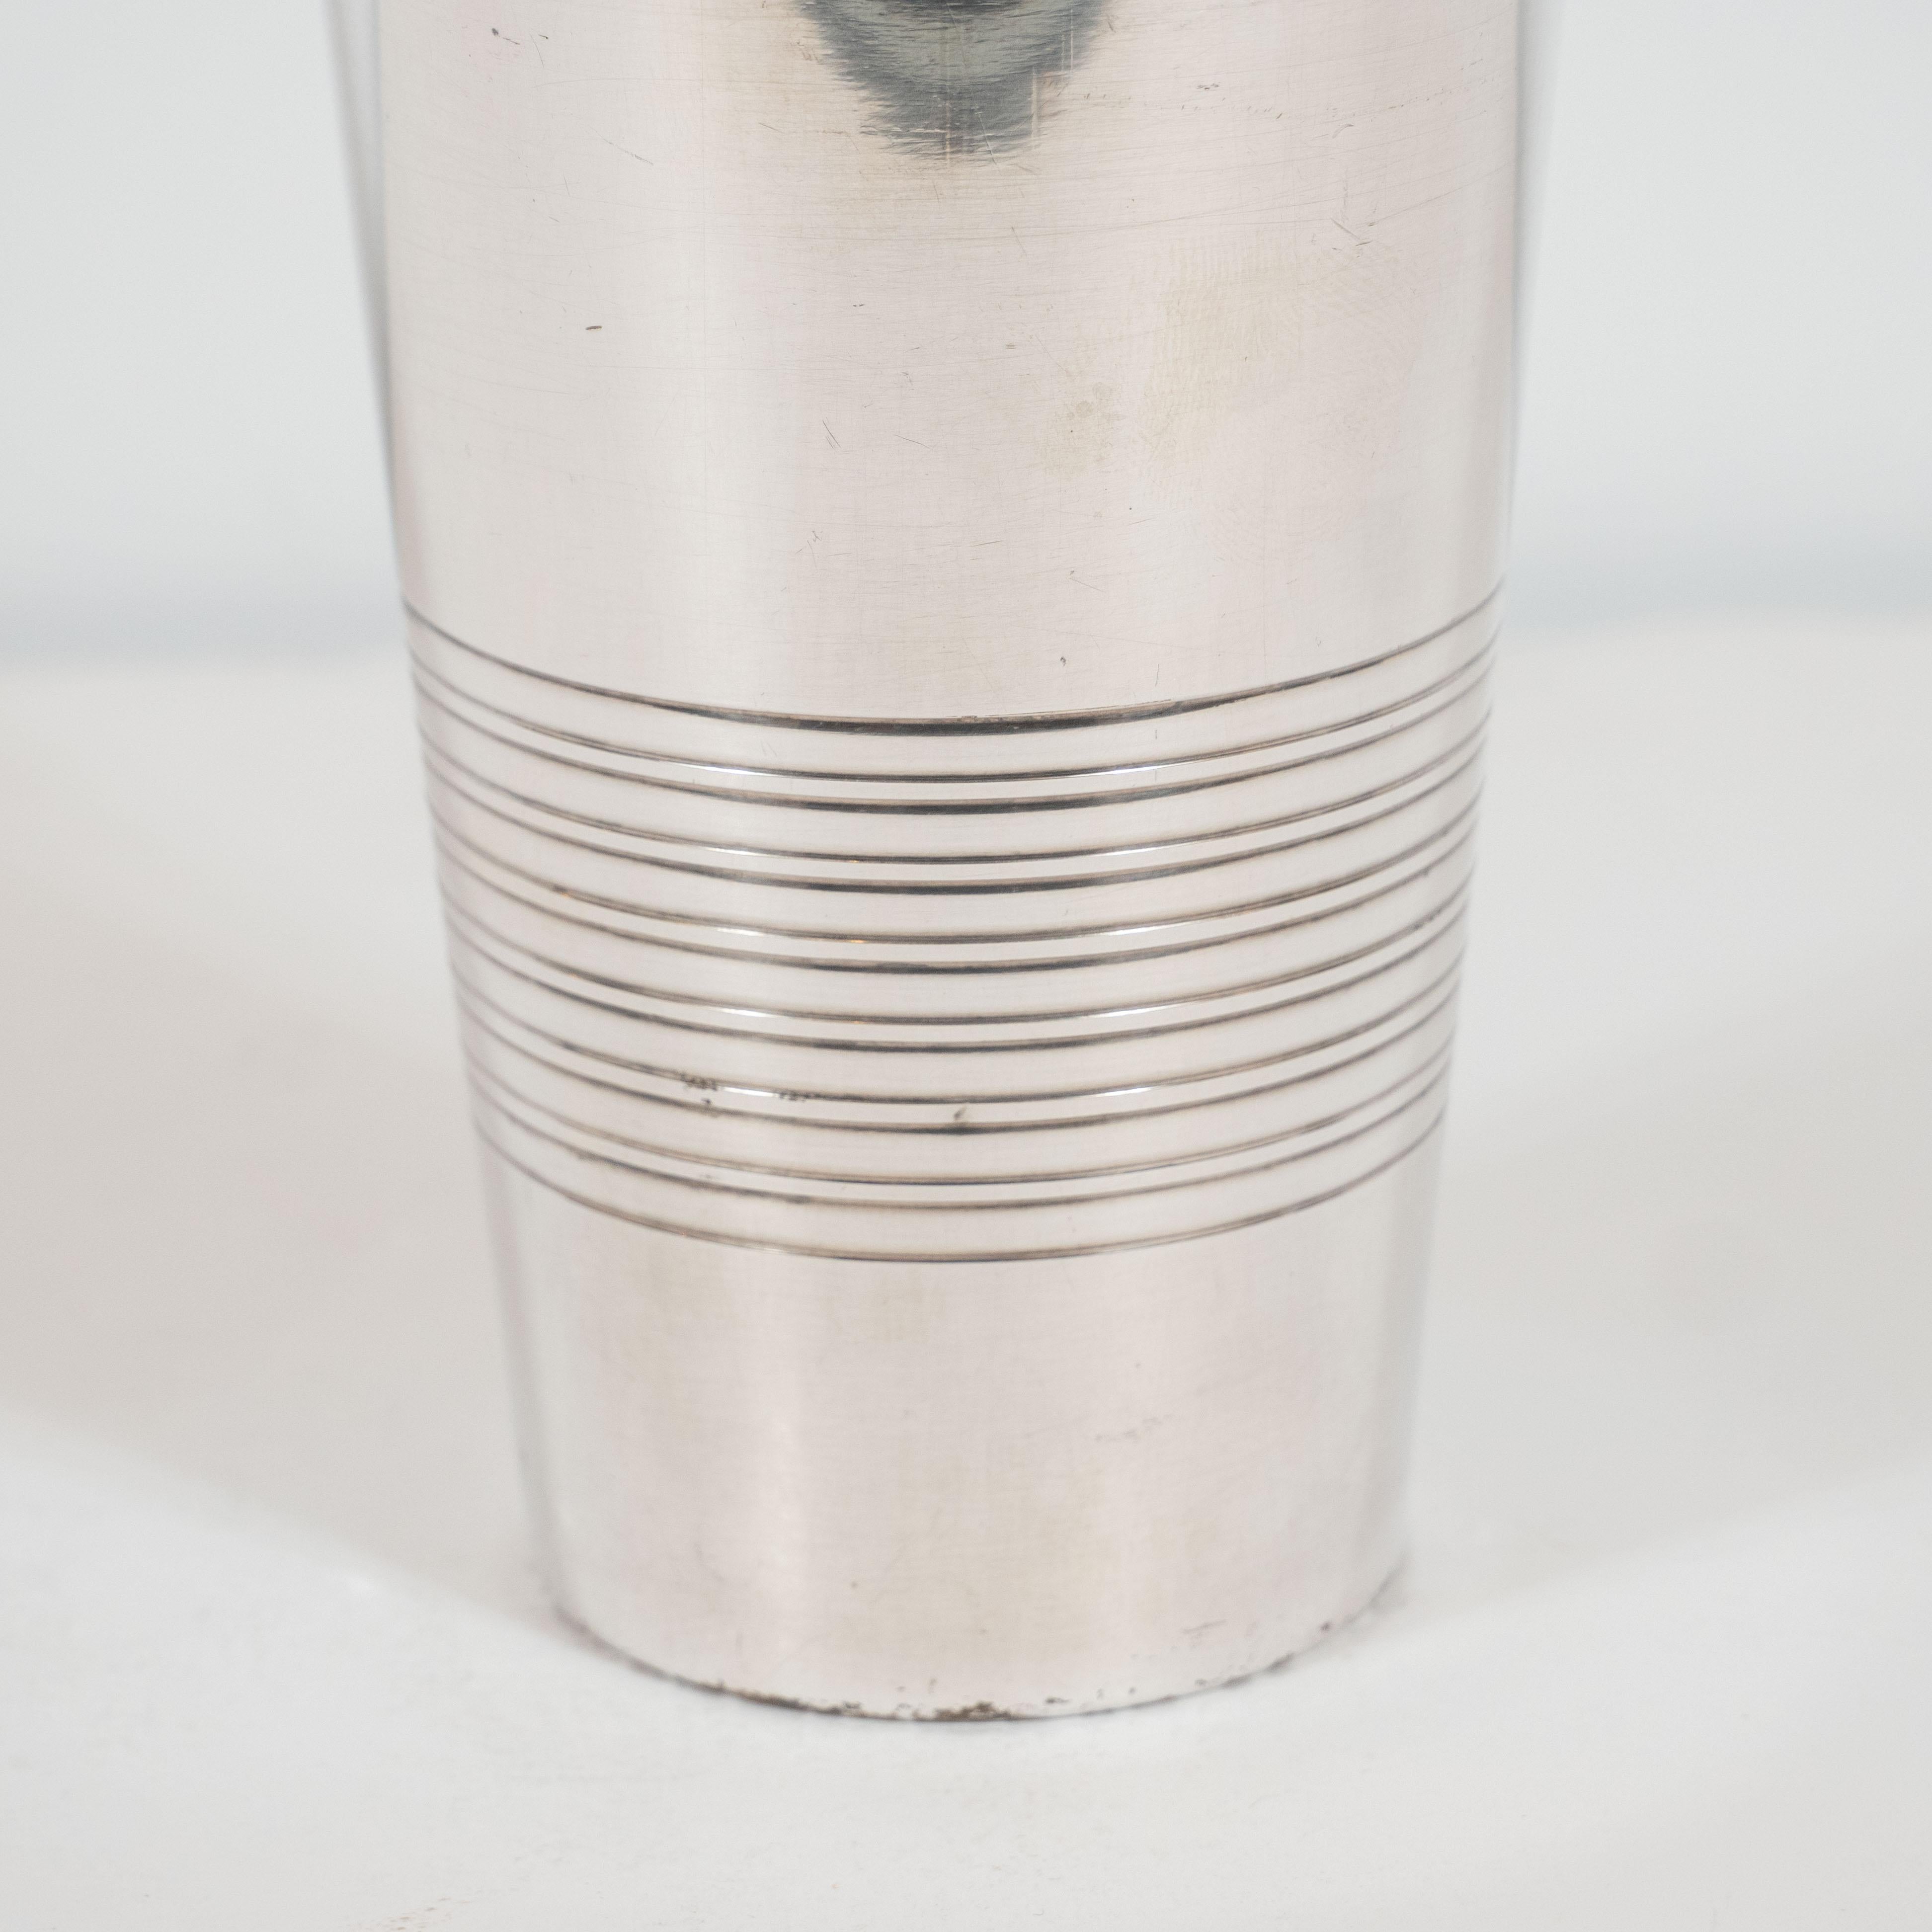 Mid-20th Century French Art Deco Streamlined Silver Plate Cocktail or Martini Shaker